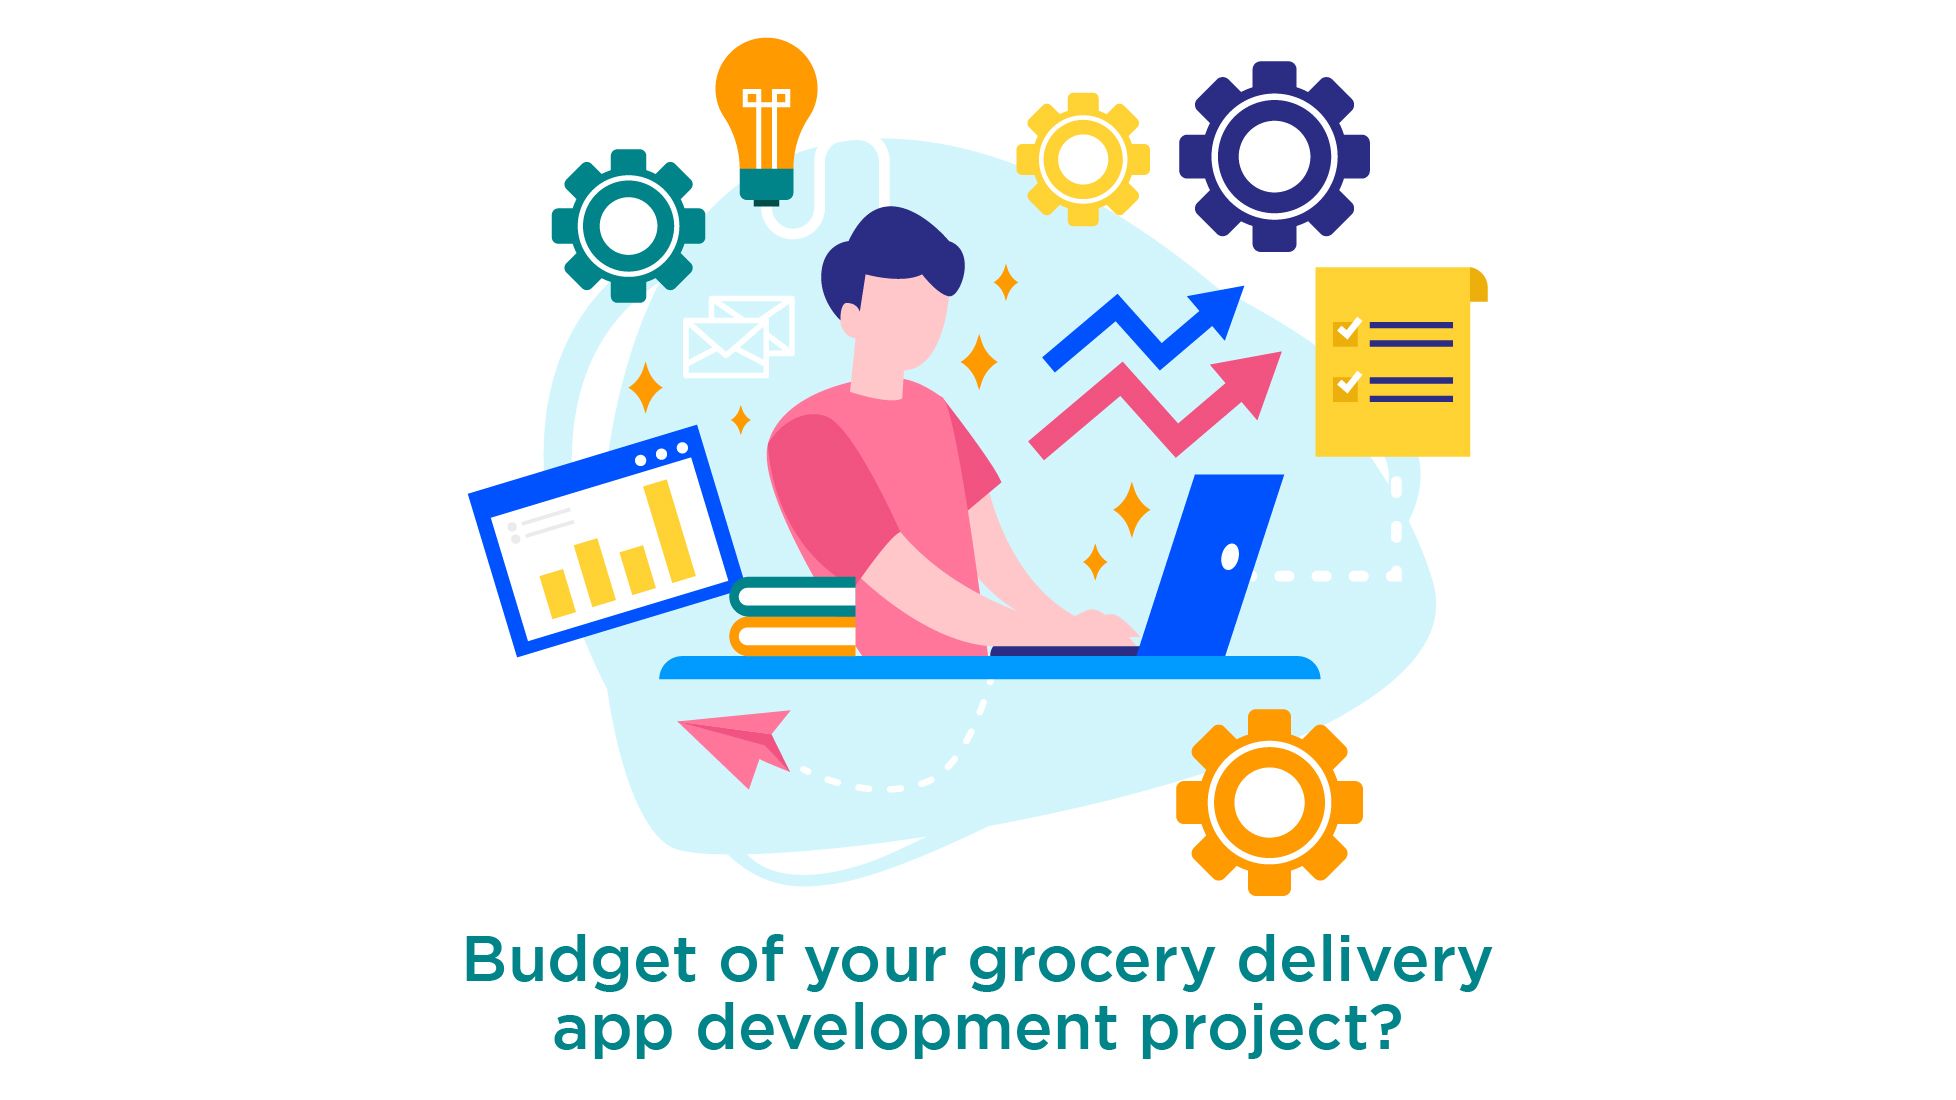 What can be the approximate budget of your grocery delivery app development project?